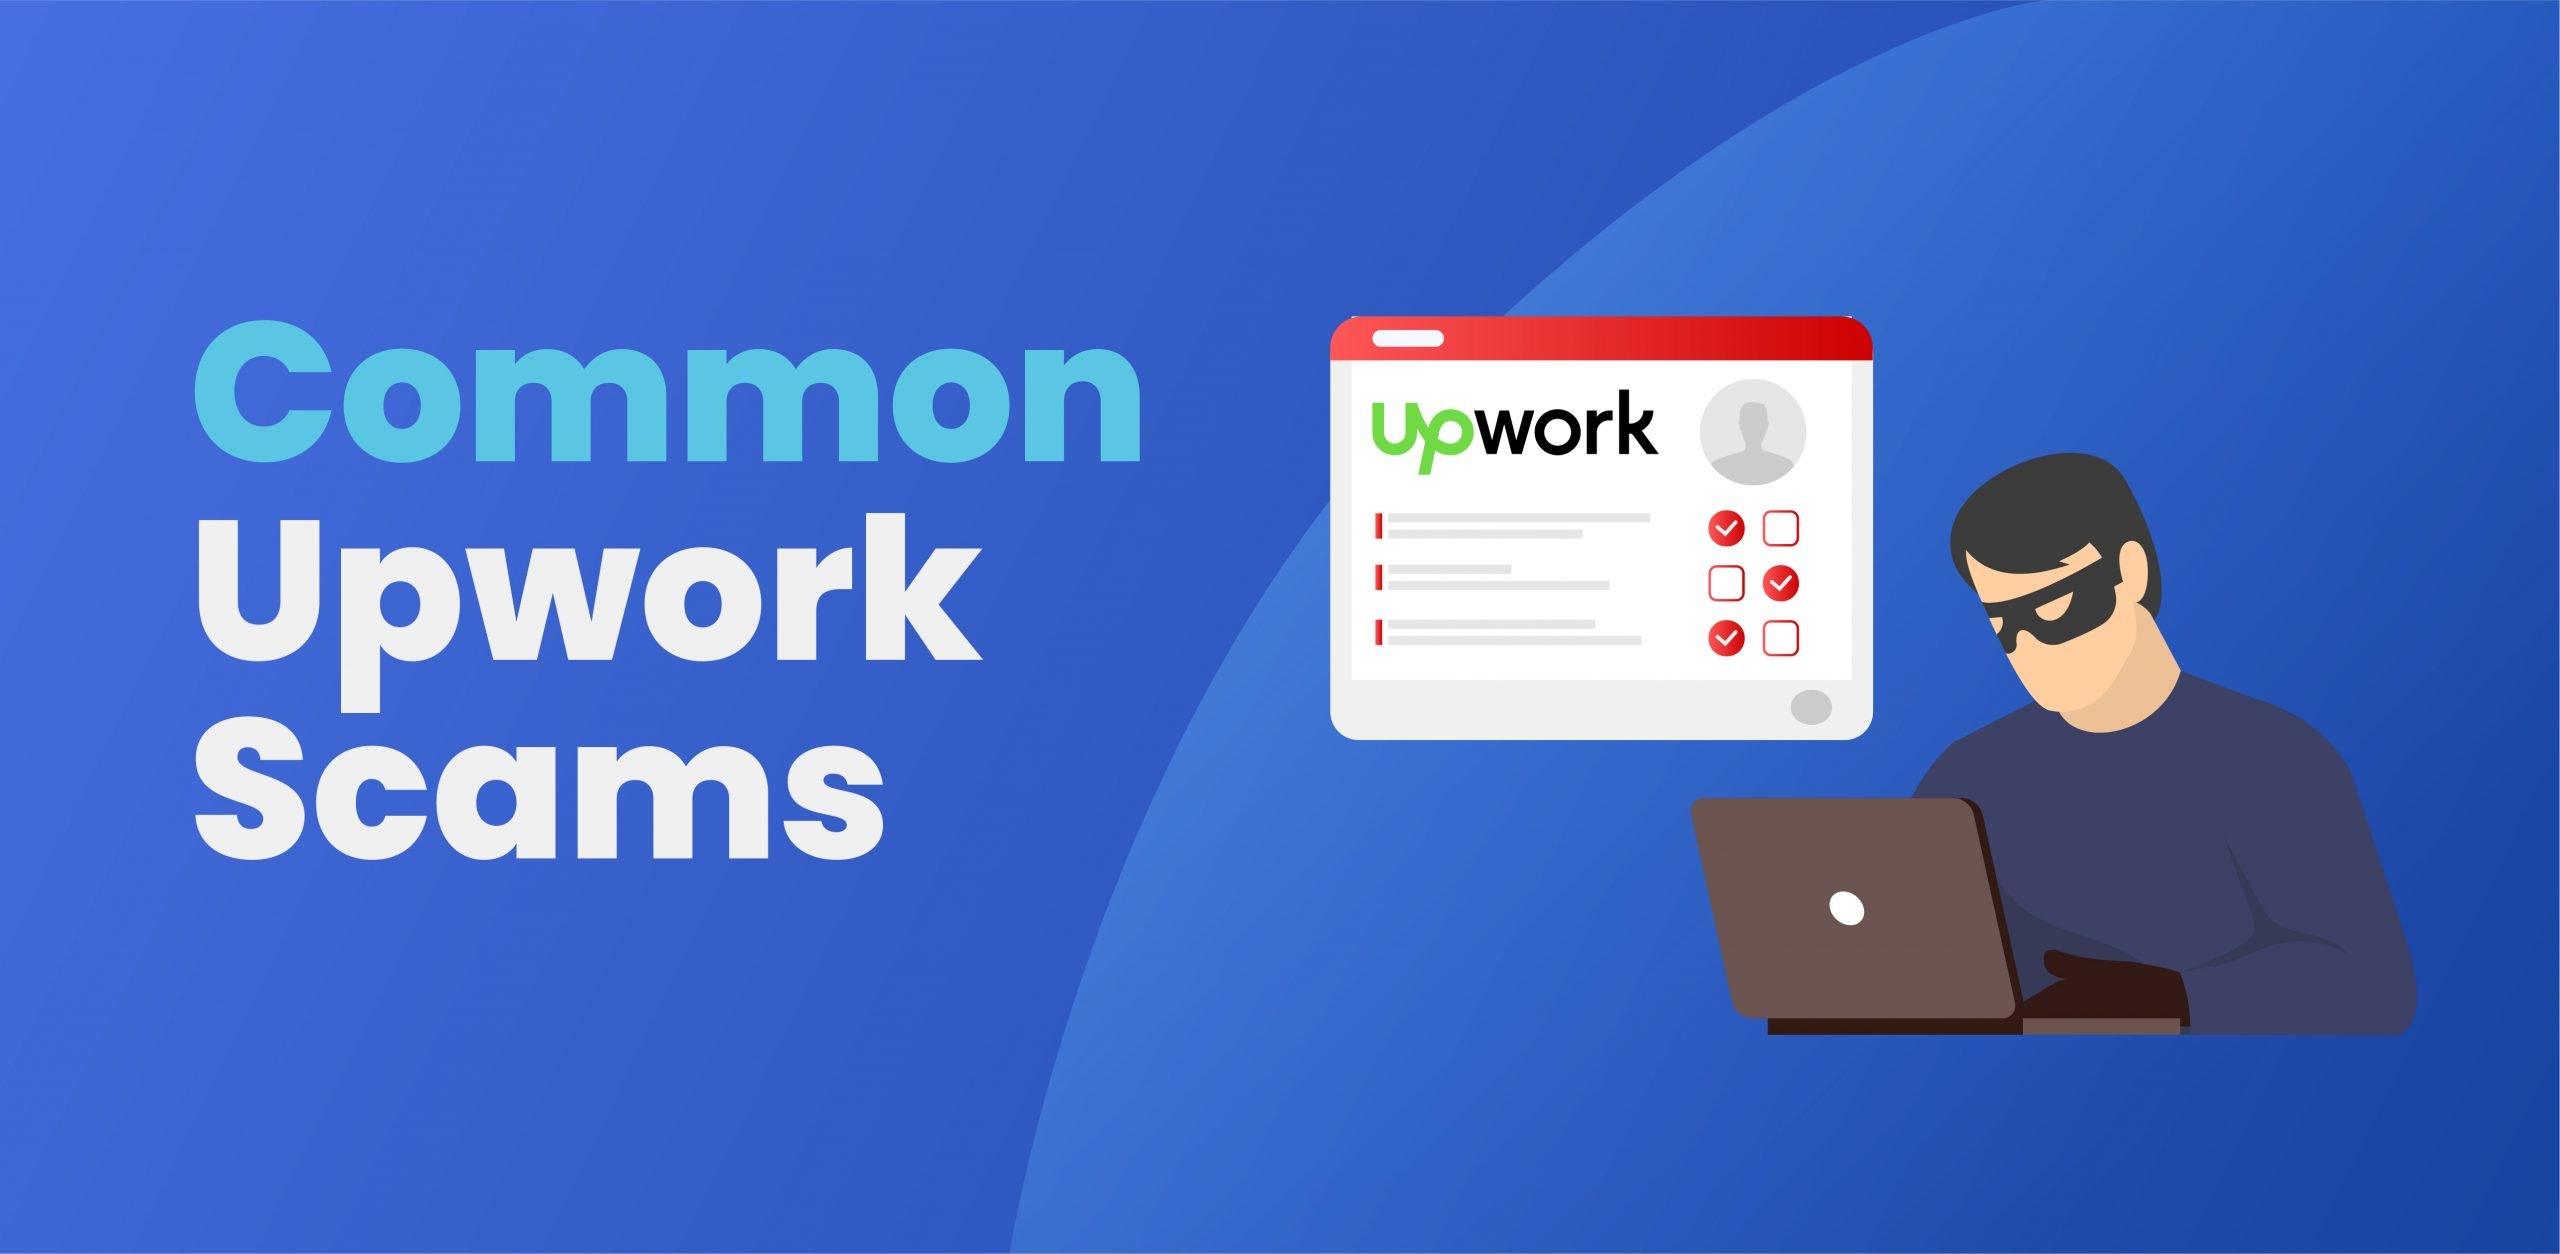 Common Upwork Scams